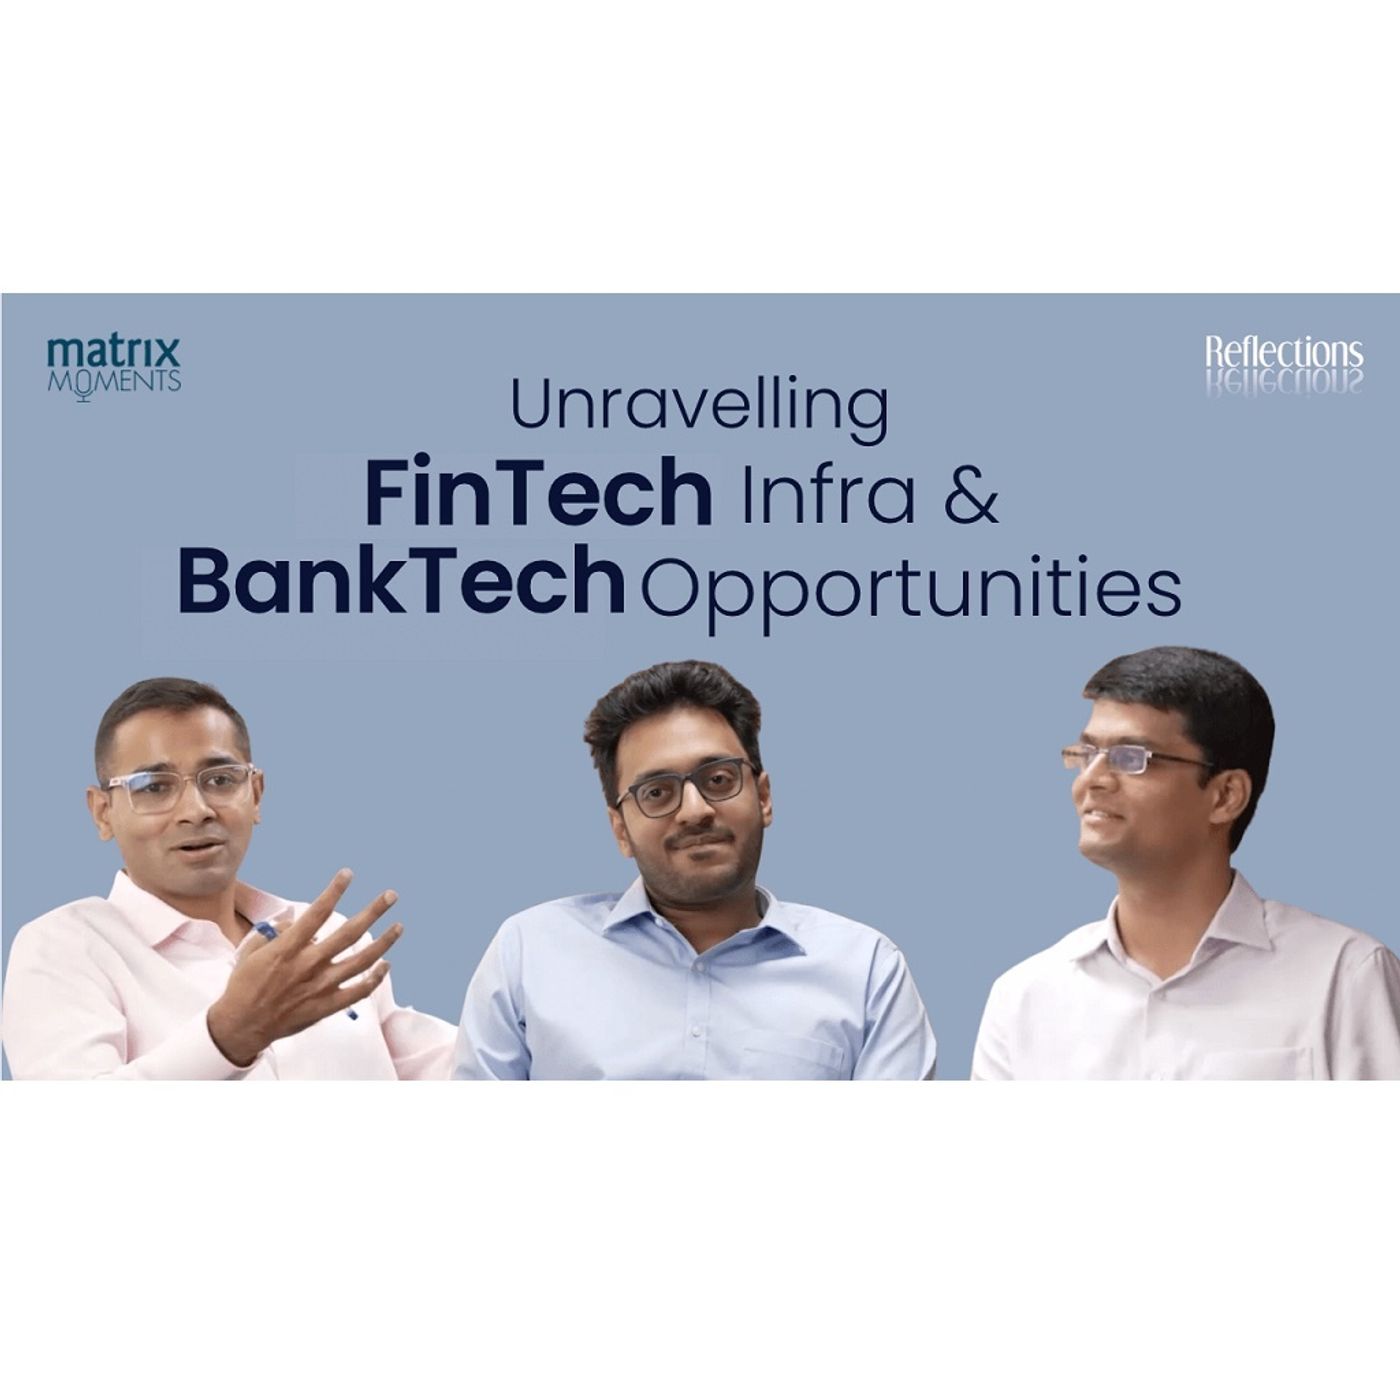 170: Unravelling Fintech Infra and Banktech Opportunities